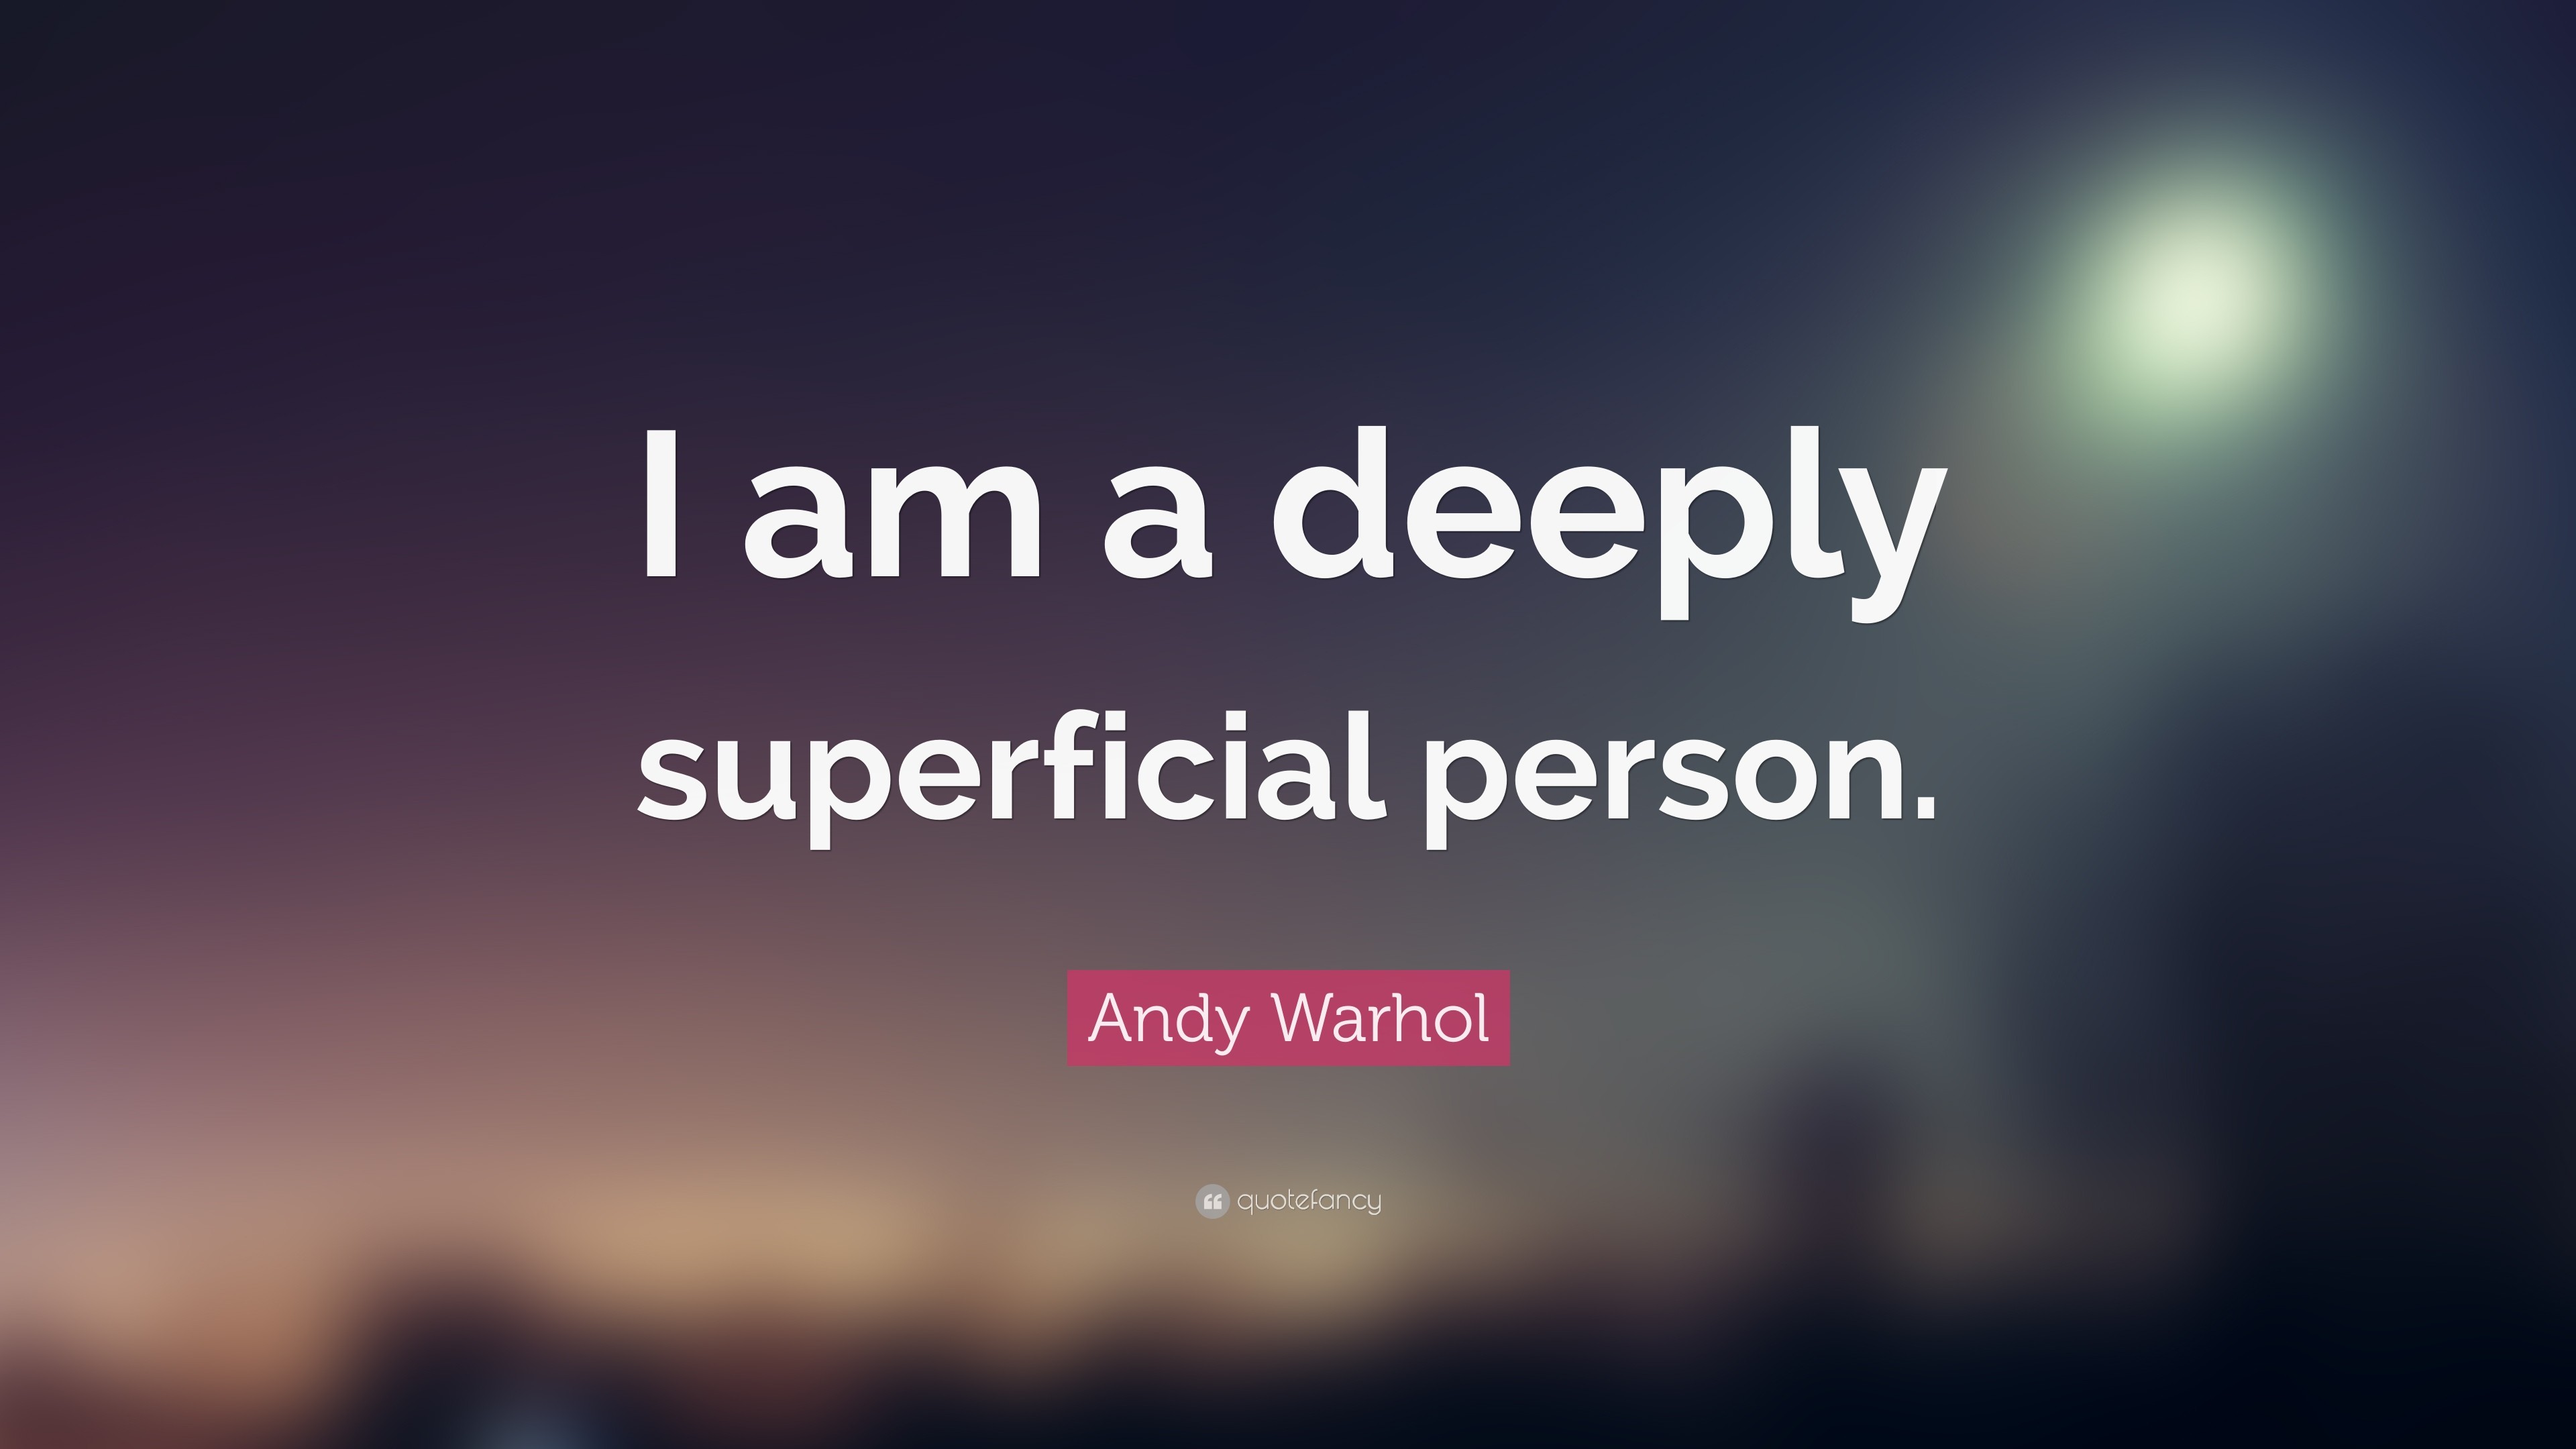 3840x2160 Andy Warhol Quote: “I am a deeply superficial person.”